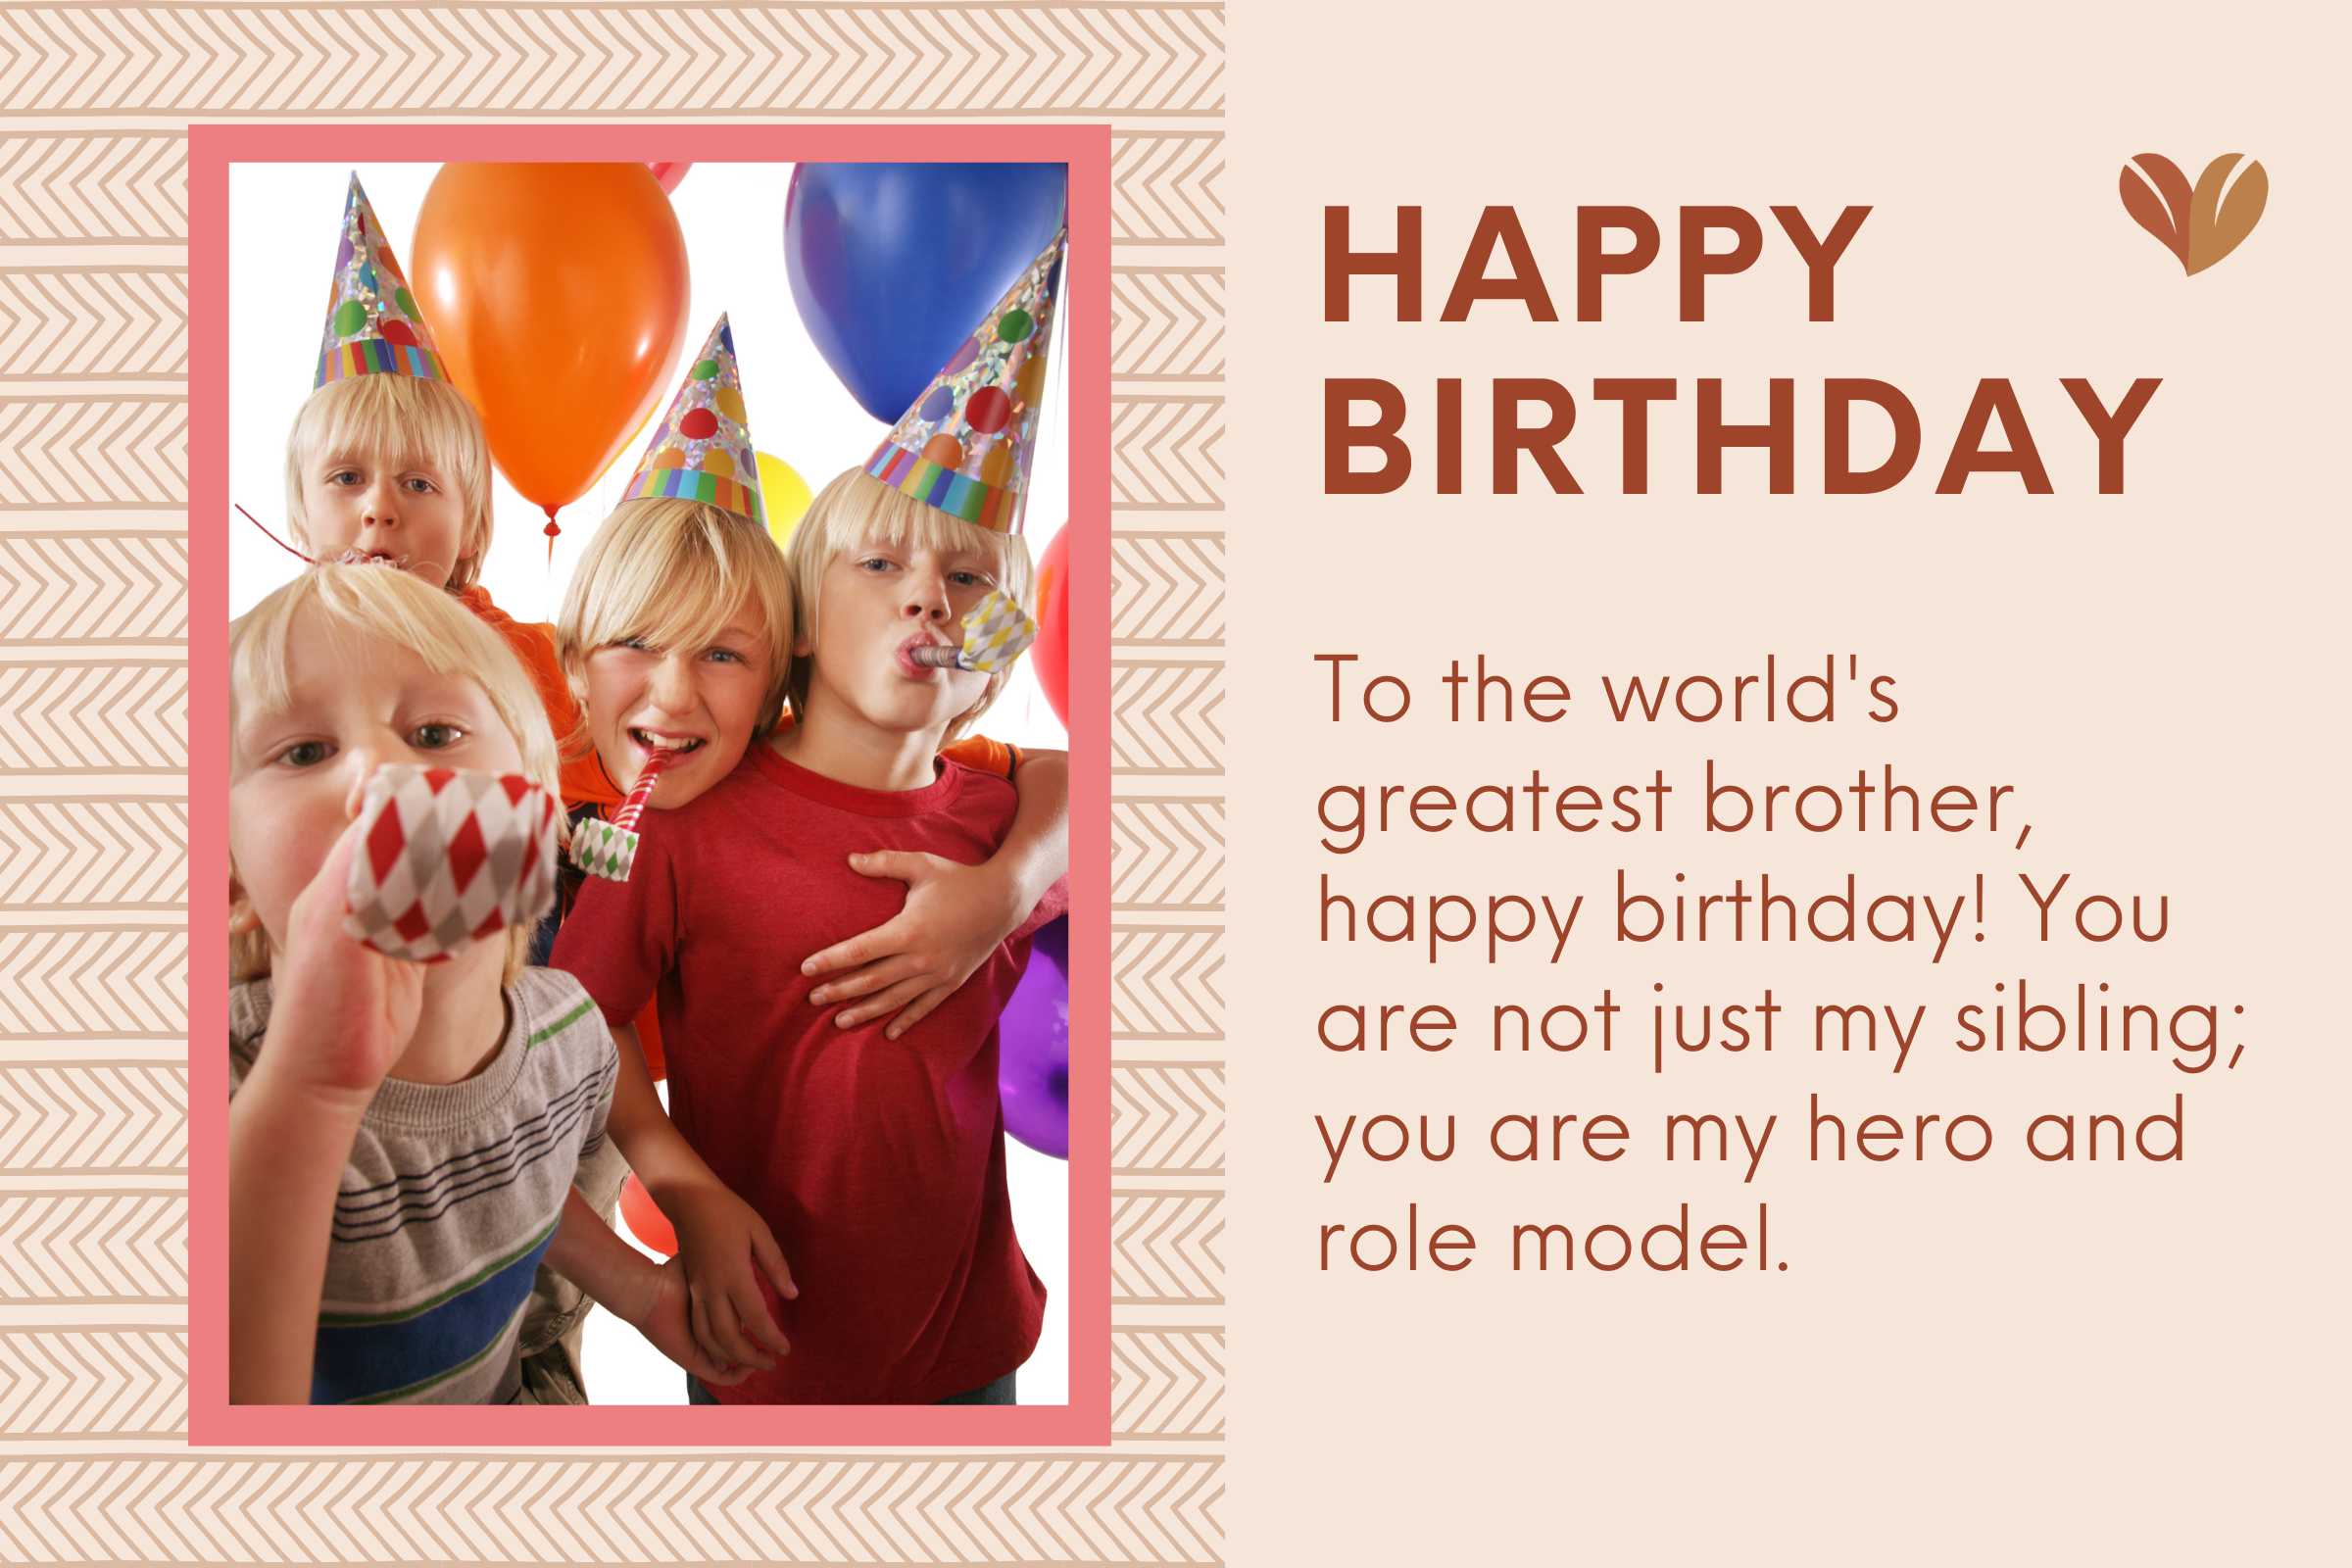 May this year be filled with happiness and love to you with happy birthday wishes little brother